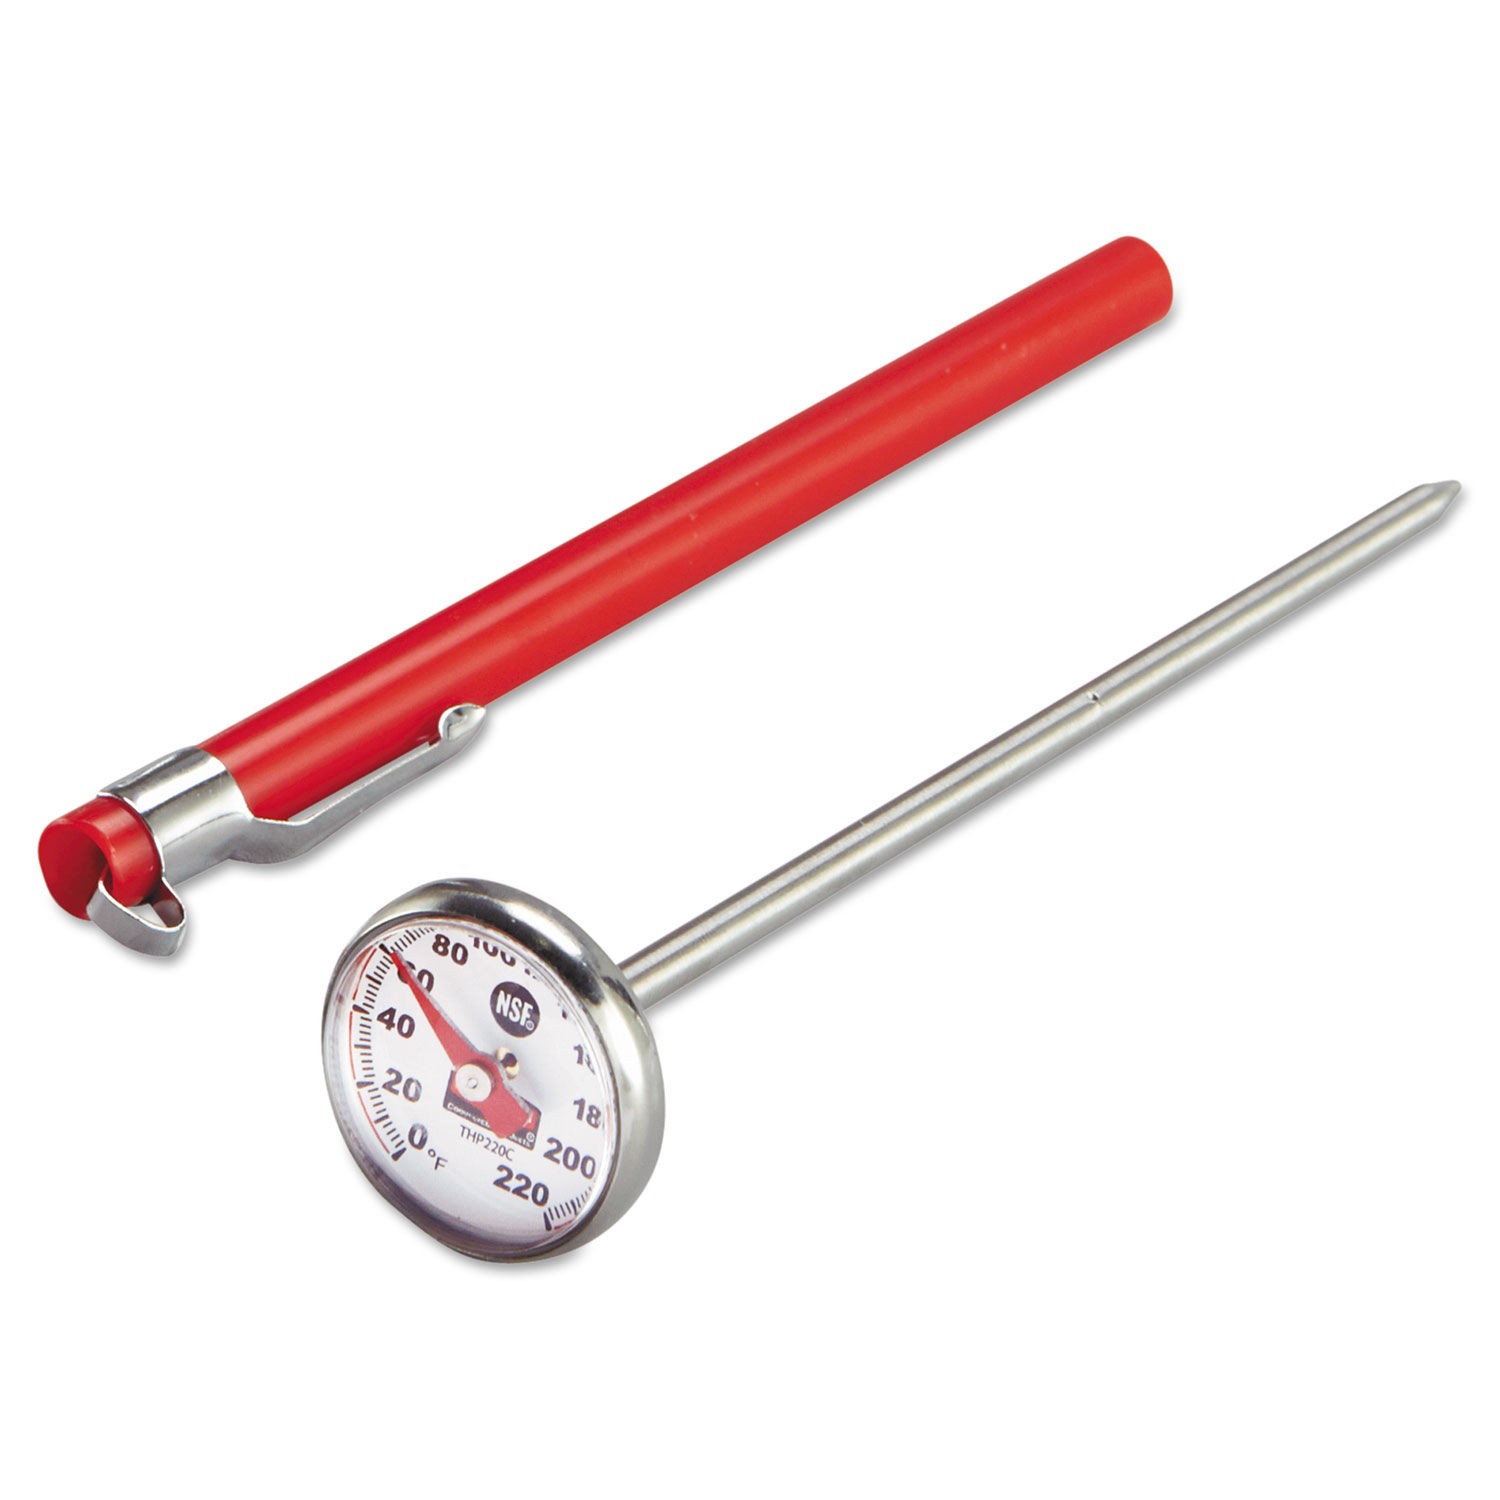 https://www.lionsdeal.com/itempics/Industrial-Grade-Analog-Pocket-Thermometer--0F-to-220F-19825_xlarge.jpg